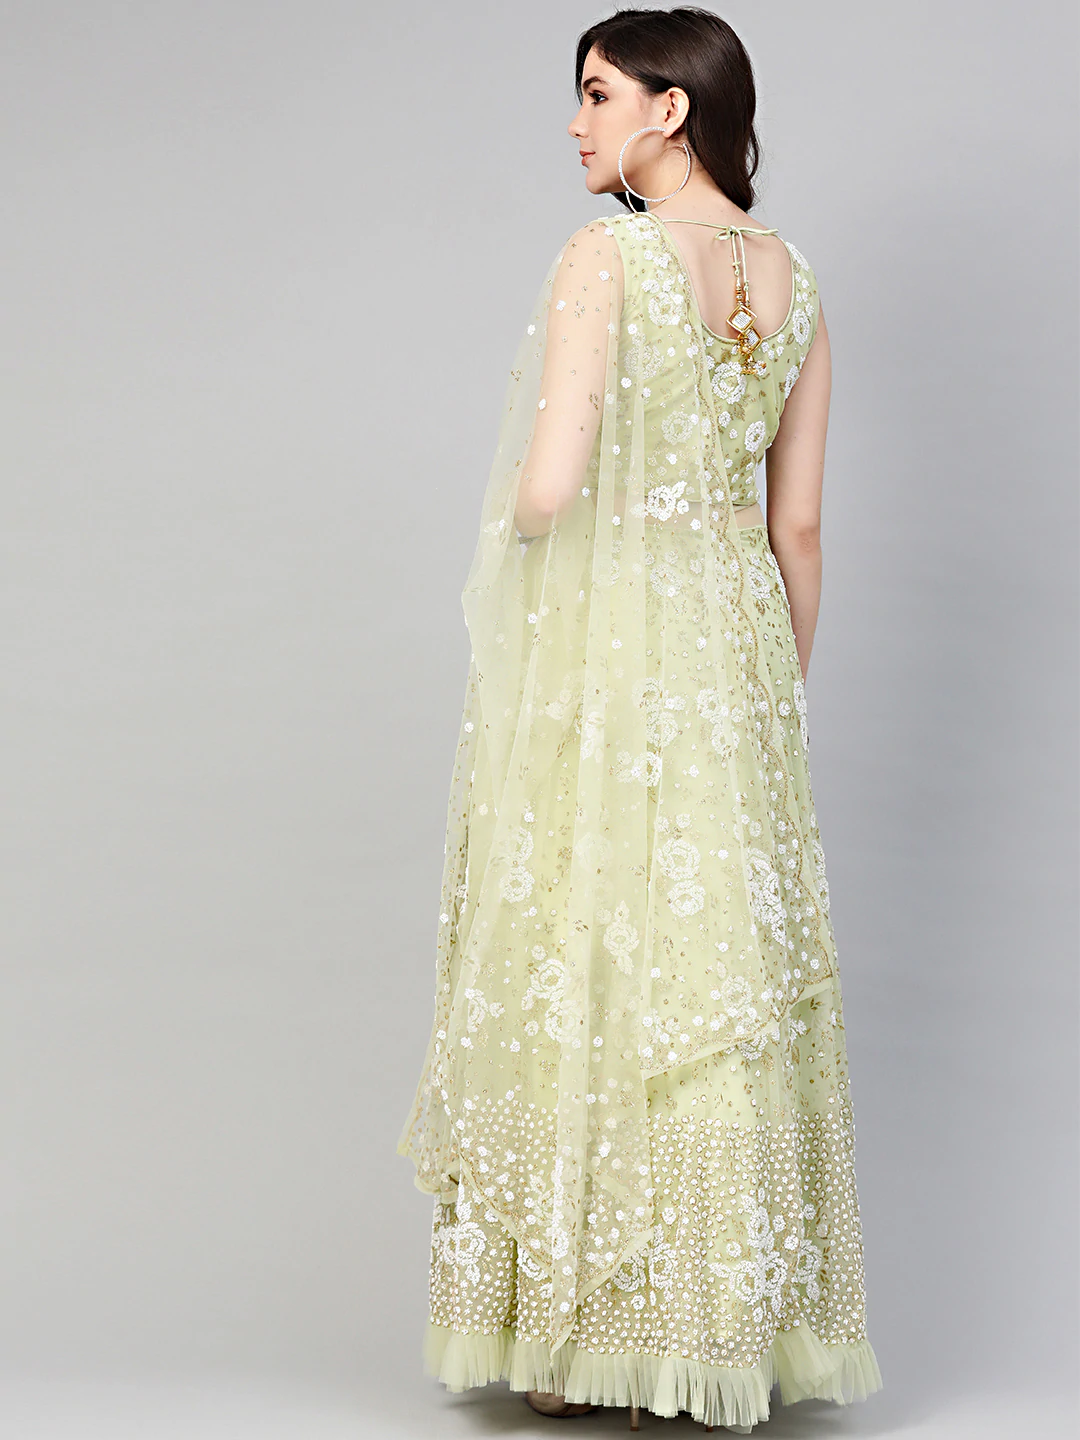  Green Cocktail Gown with Pearl Glitter embellishements, Ruffled hemline and cutwork dupatta